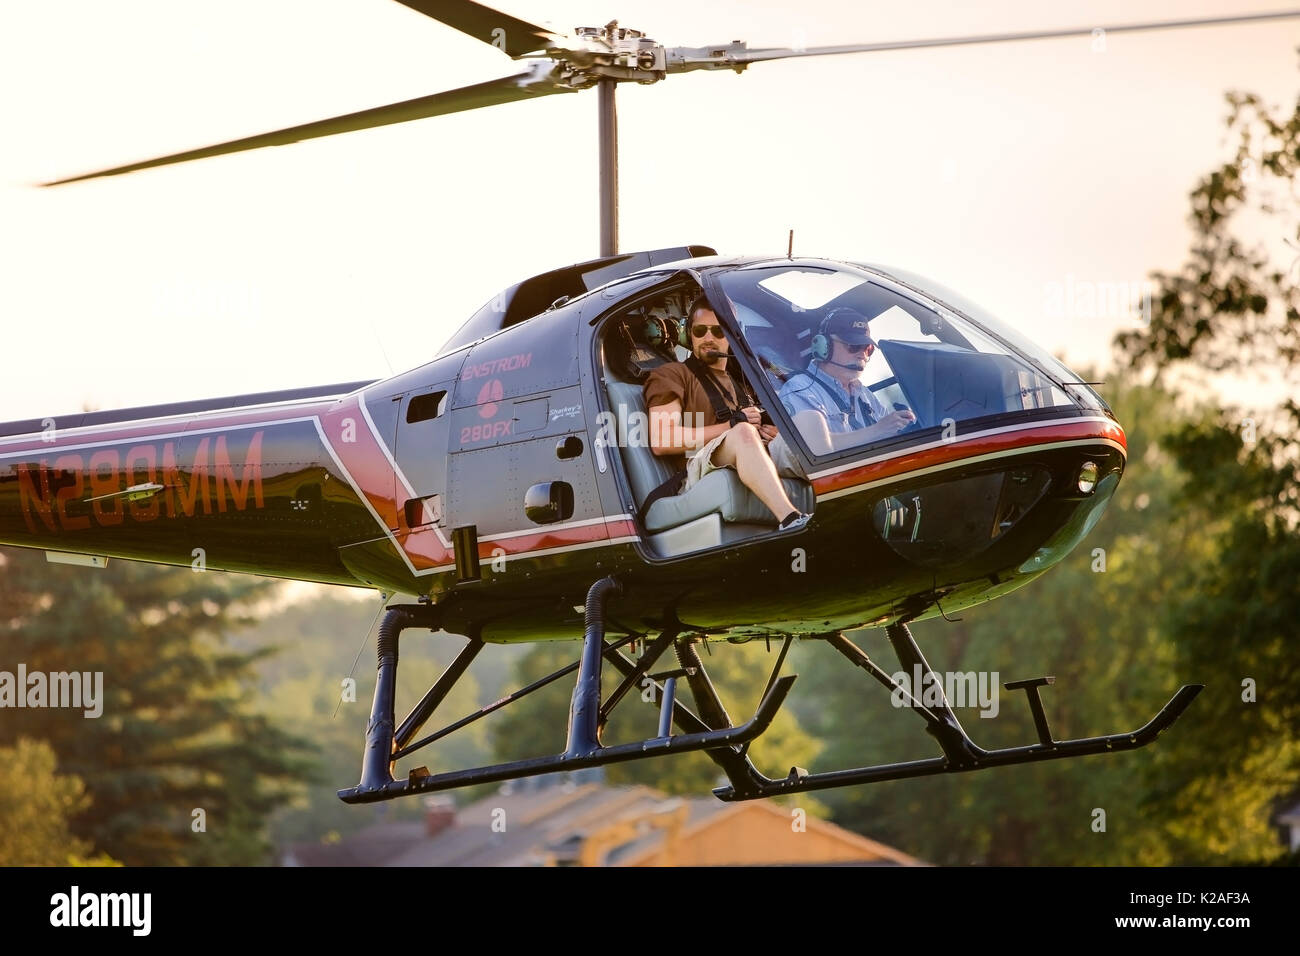 HELICOPTER TAKING OFF TO PERFORM AERIAL PHOTOGRAPHY, LANCASTER PENNSYLVANIA Stock Photo